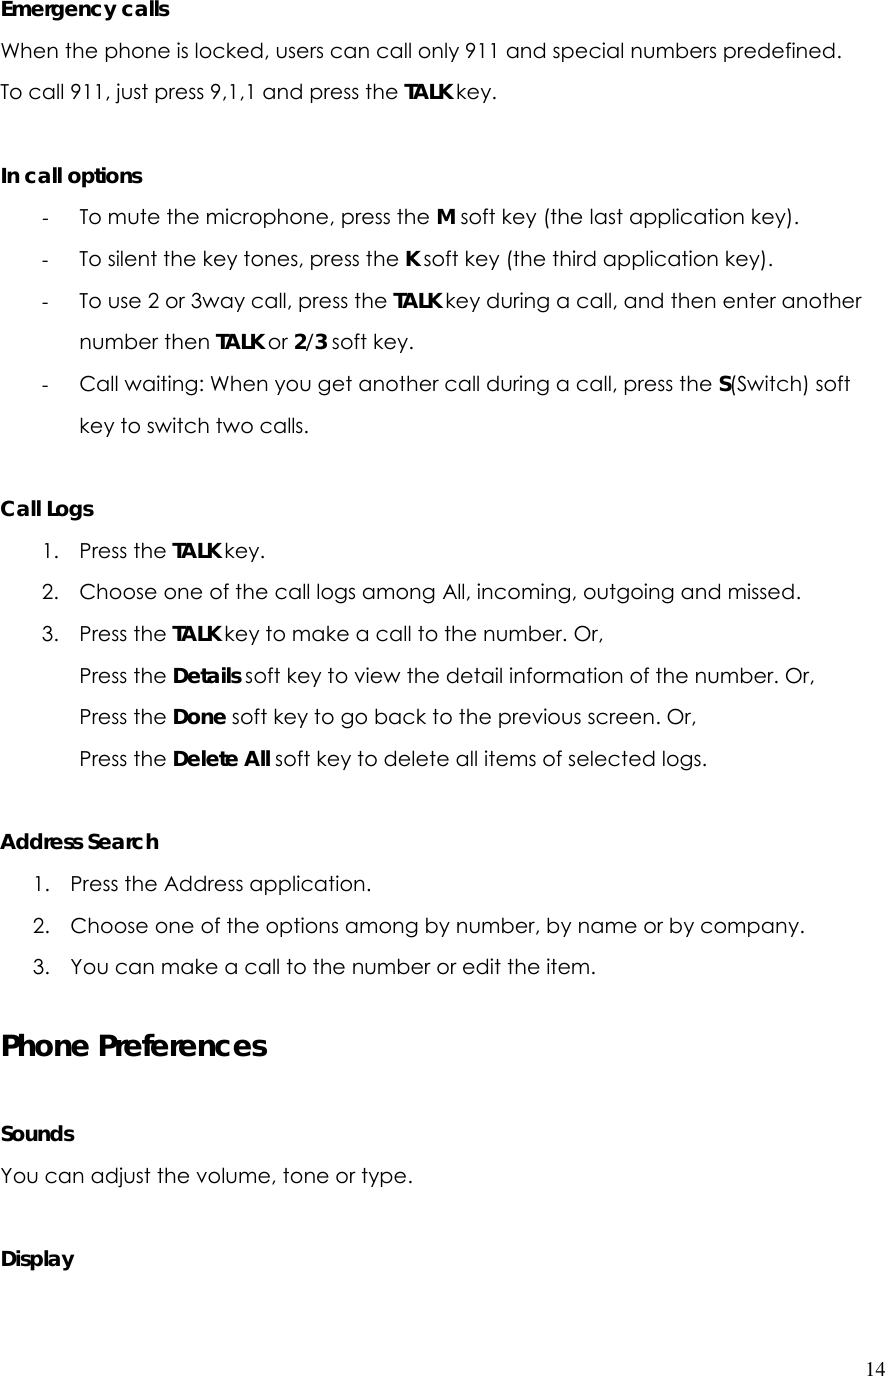  14 Emergency calls When the phone is locked, users can call only 911 and special numbers predefined. To call 911, just press 9,1,1 and press the TALK key.  In call options - To mute the microphone, press the M soft key (the last application key). - To silent the key tones, press the K soft key (the third application key). - To use 2 or 3way call, press the TALK key during a call, and then enter another number then TALK or 2/3 soft key. - Call waiting: When you get another call during a call, press the S(Switch) soft key to switch two calls.  Call Logs 1. Press the TALK key. 2. Choose one of the call logs among All, incoming, outgoing and missed. 3. Press the TALK key to make a call to the number. Or, Press the Details soft key to view the detail information of the number. Or, Press the Done soft key to go back to the previous screen. Or, Press the Delete All soft key to delete all items of selected logs.   Address Search 1. Press the Address application. 2. Choose one of the options among by number, by name or by company. 3. You can make a call to the number or edit the item.   Phone Preferences  Sounds You can adjust the volume, tone or type.  Display 